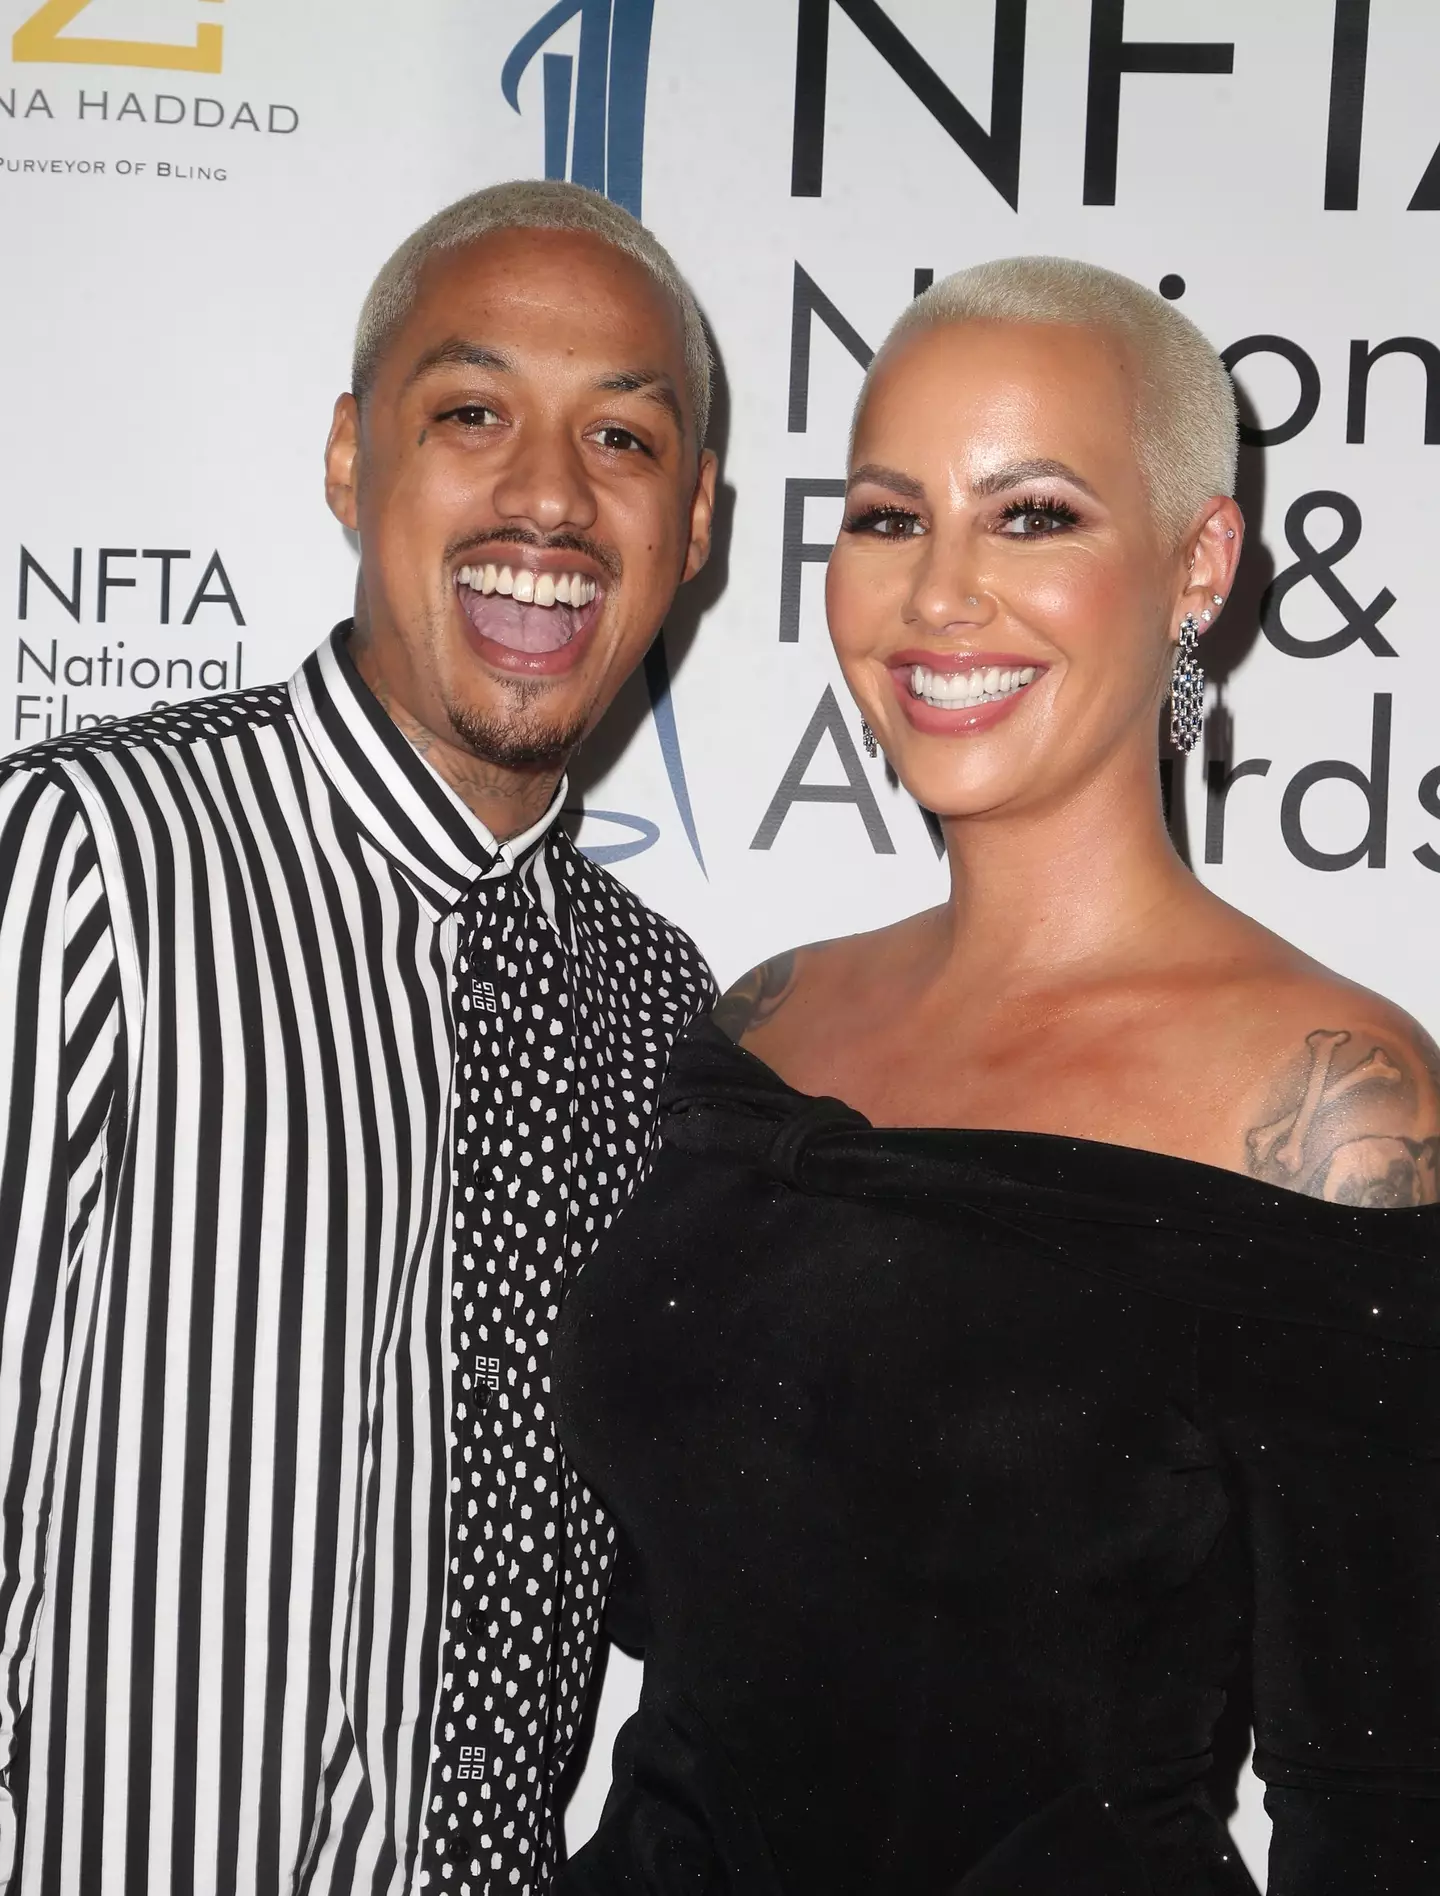 Alexander Edwards and Amber Rose in 2018.